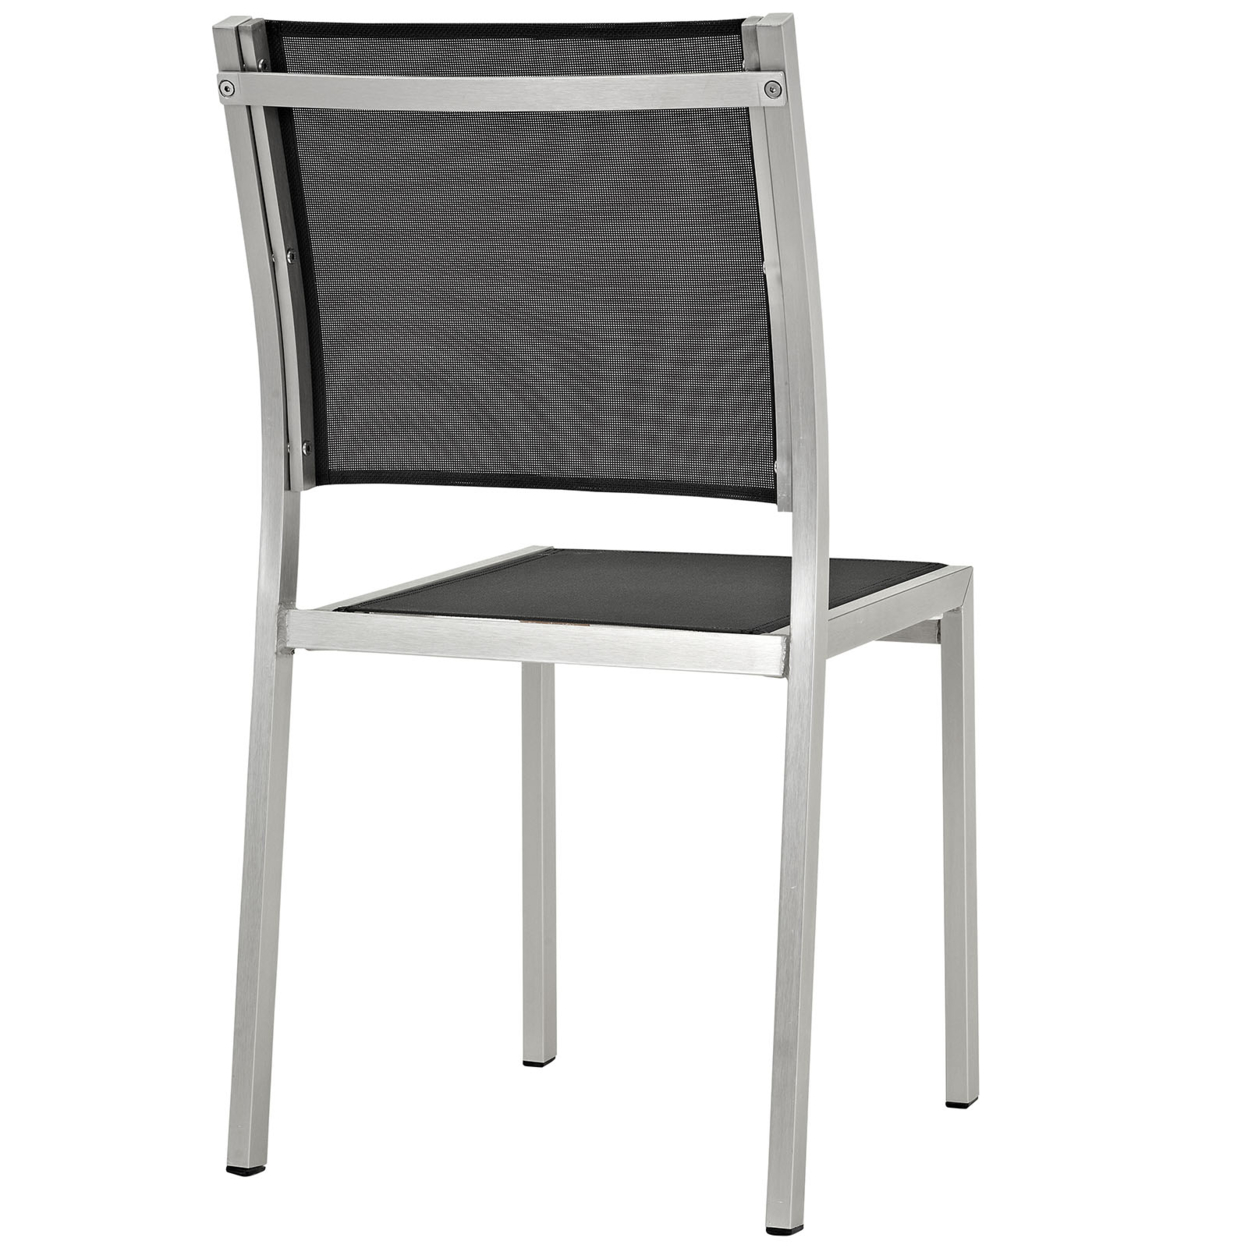 Shore Side Chair Outdoor Patio Aluminum Set Of 2, Silver Black